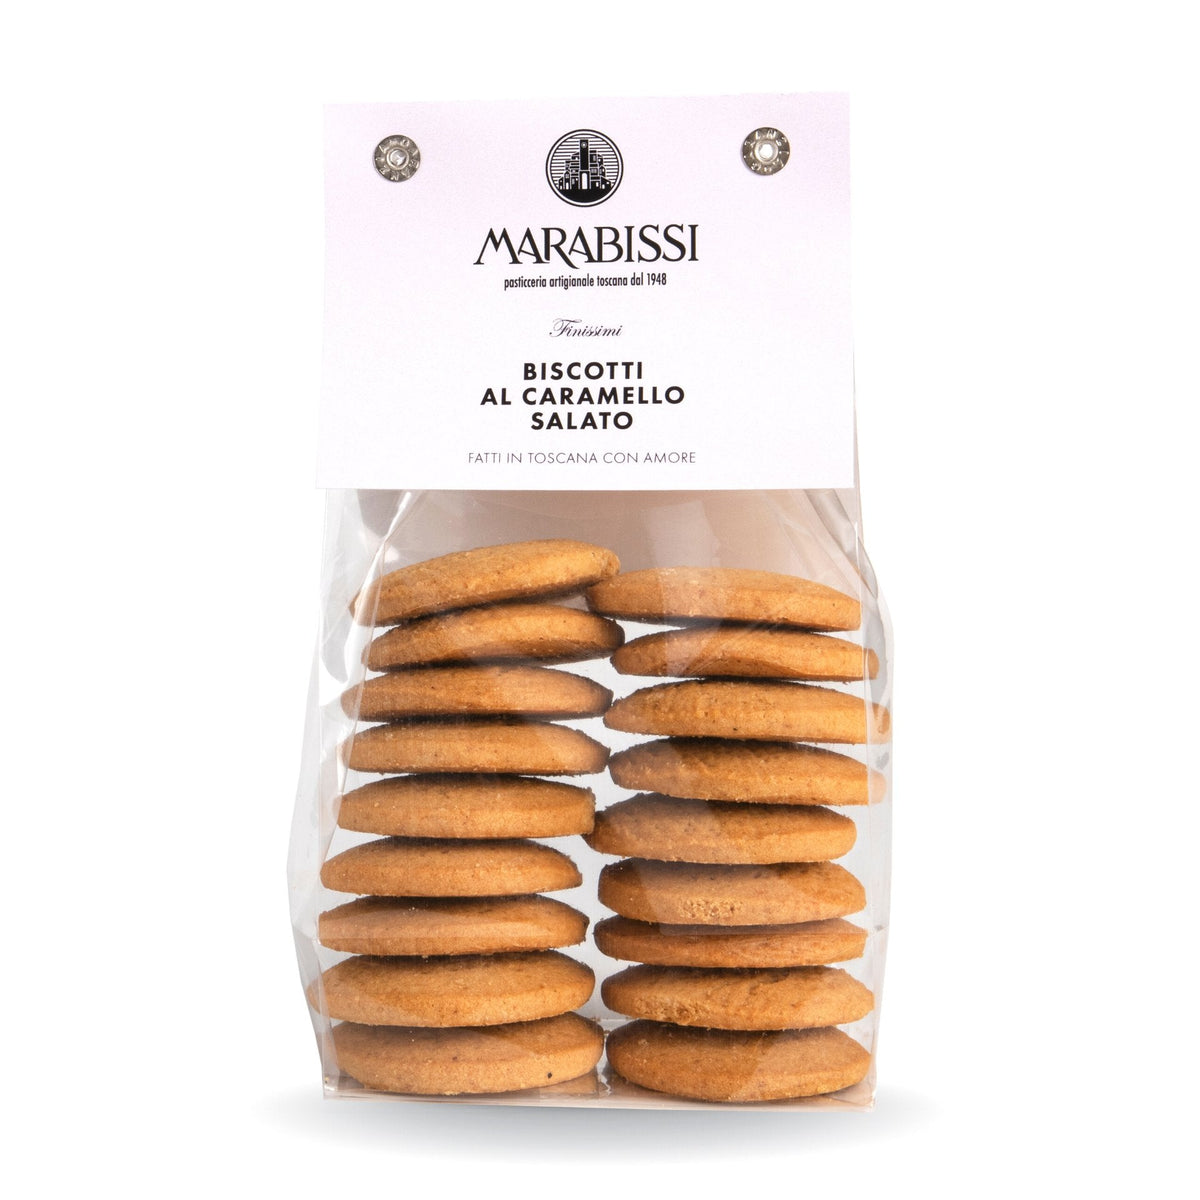 Marabissi Salted Caramel Artisan Biscuits (Bag) 200g  | Imported and distributed in the UK by Just Gourmet Foods